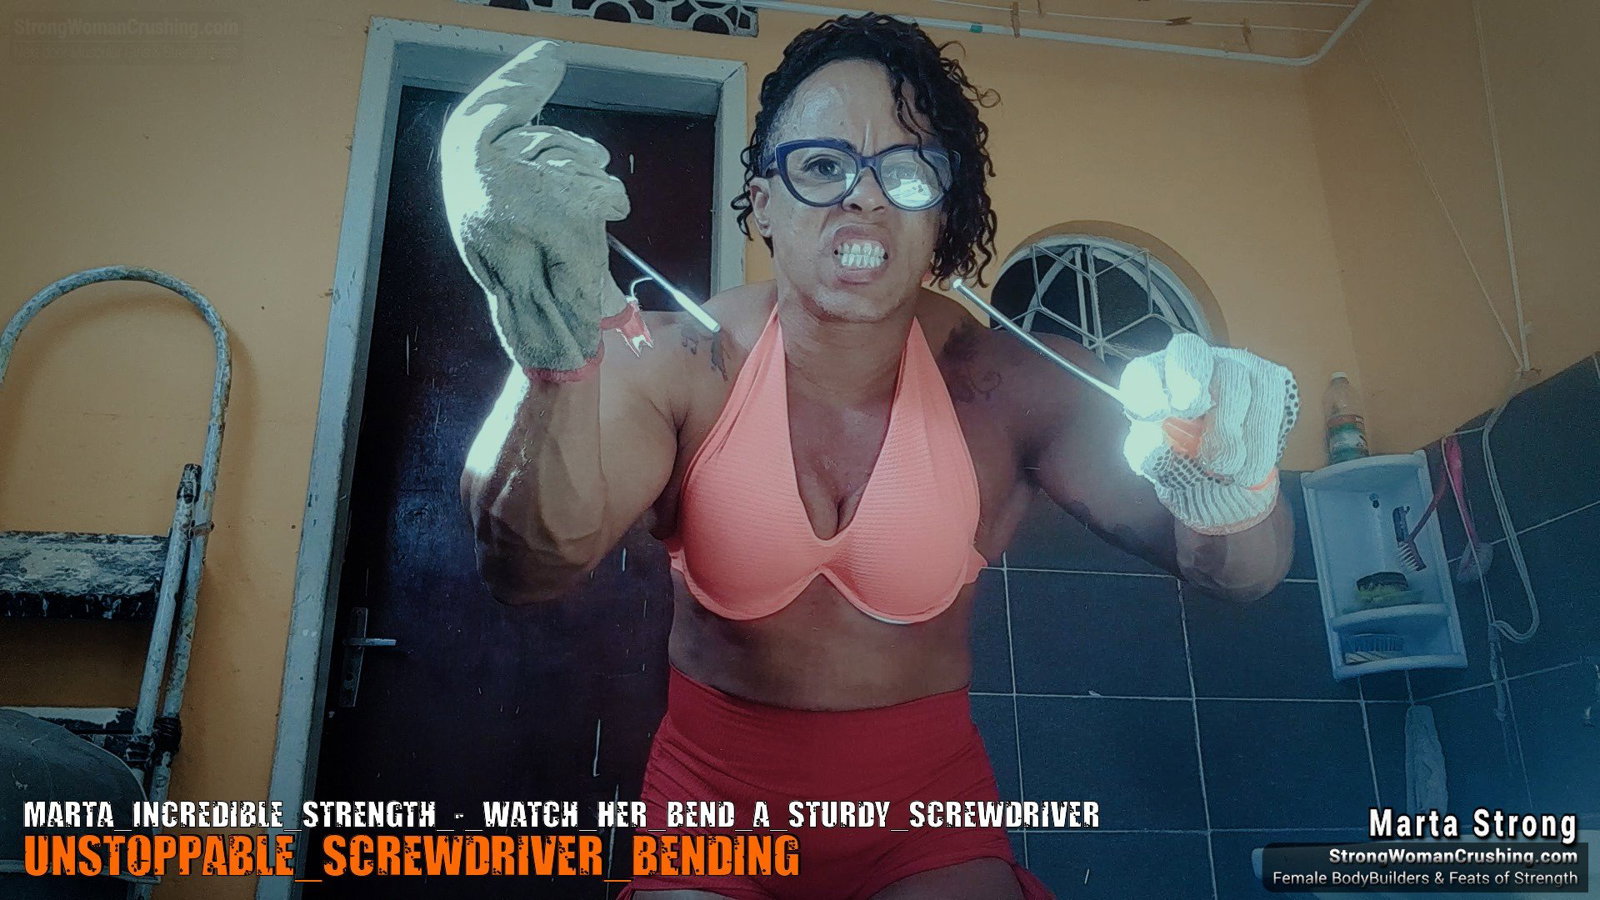 Watch the Photo by MusclegirlStrength with the username @MusclegirlStrength, who is a brand user, posted on September 6, 2023 and the text says '💪🏽 Check out Marta Incredible Strength 💪🏽 Watch her bend a sturdy screwdriver with ease! 🤯 Get your membership to watch the video now at www.strongwomancrushing.com #martastrong #strongwoman #strength #incredible #crushing'